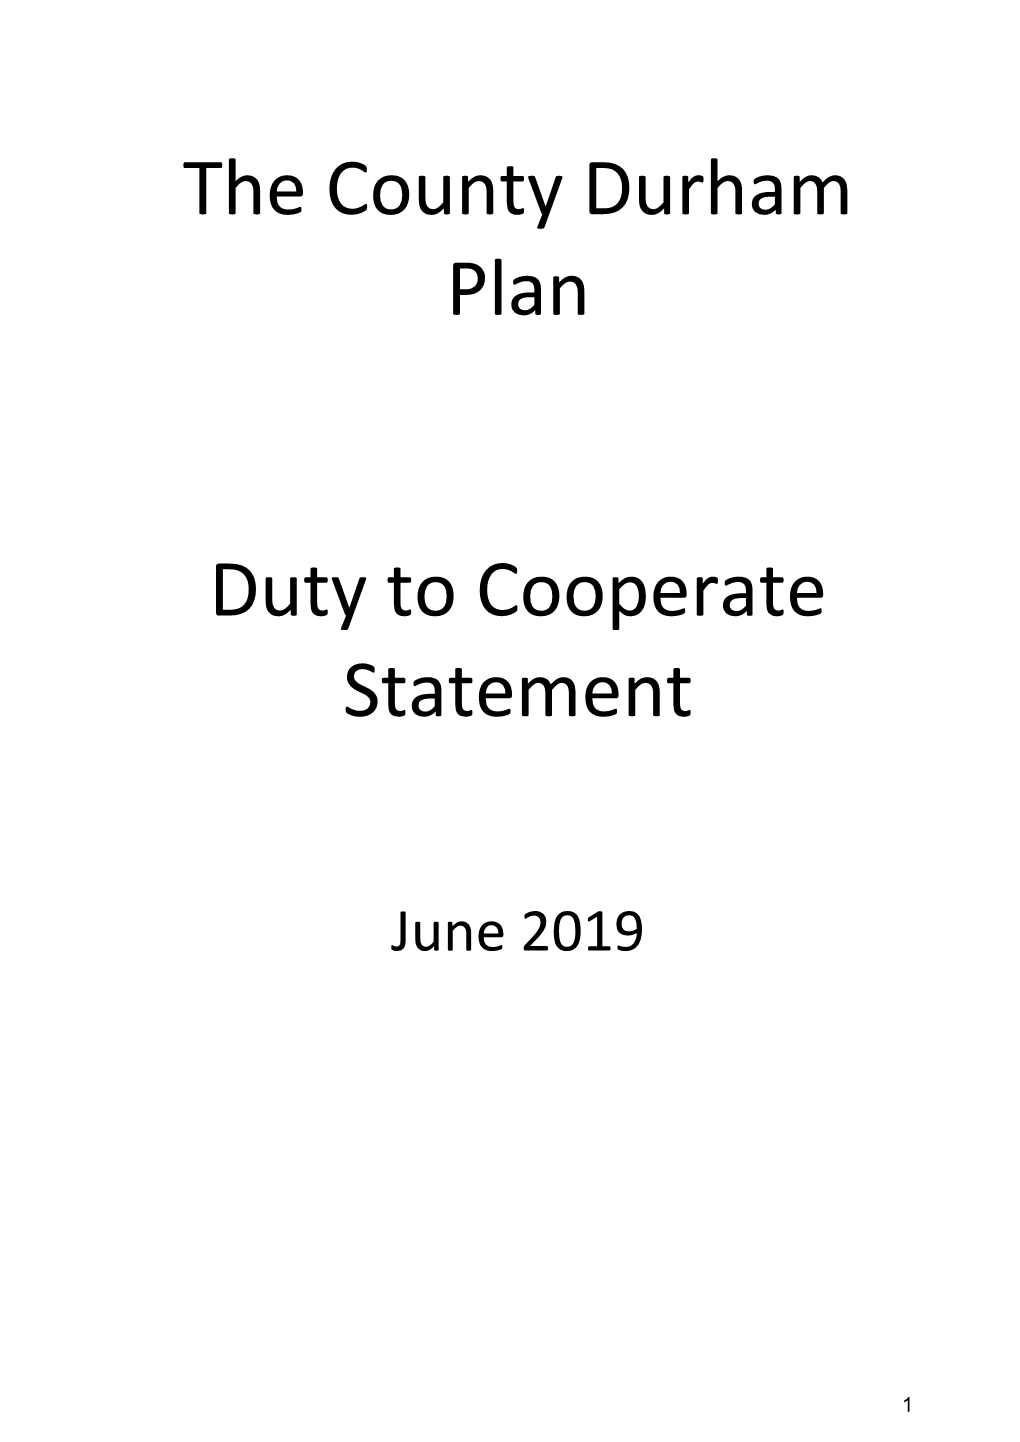 The County Durham Plan Duty to Cooperate Statement